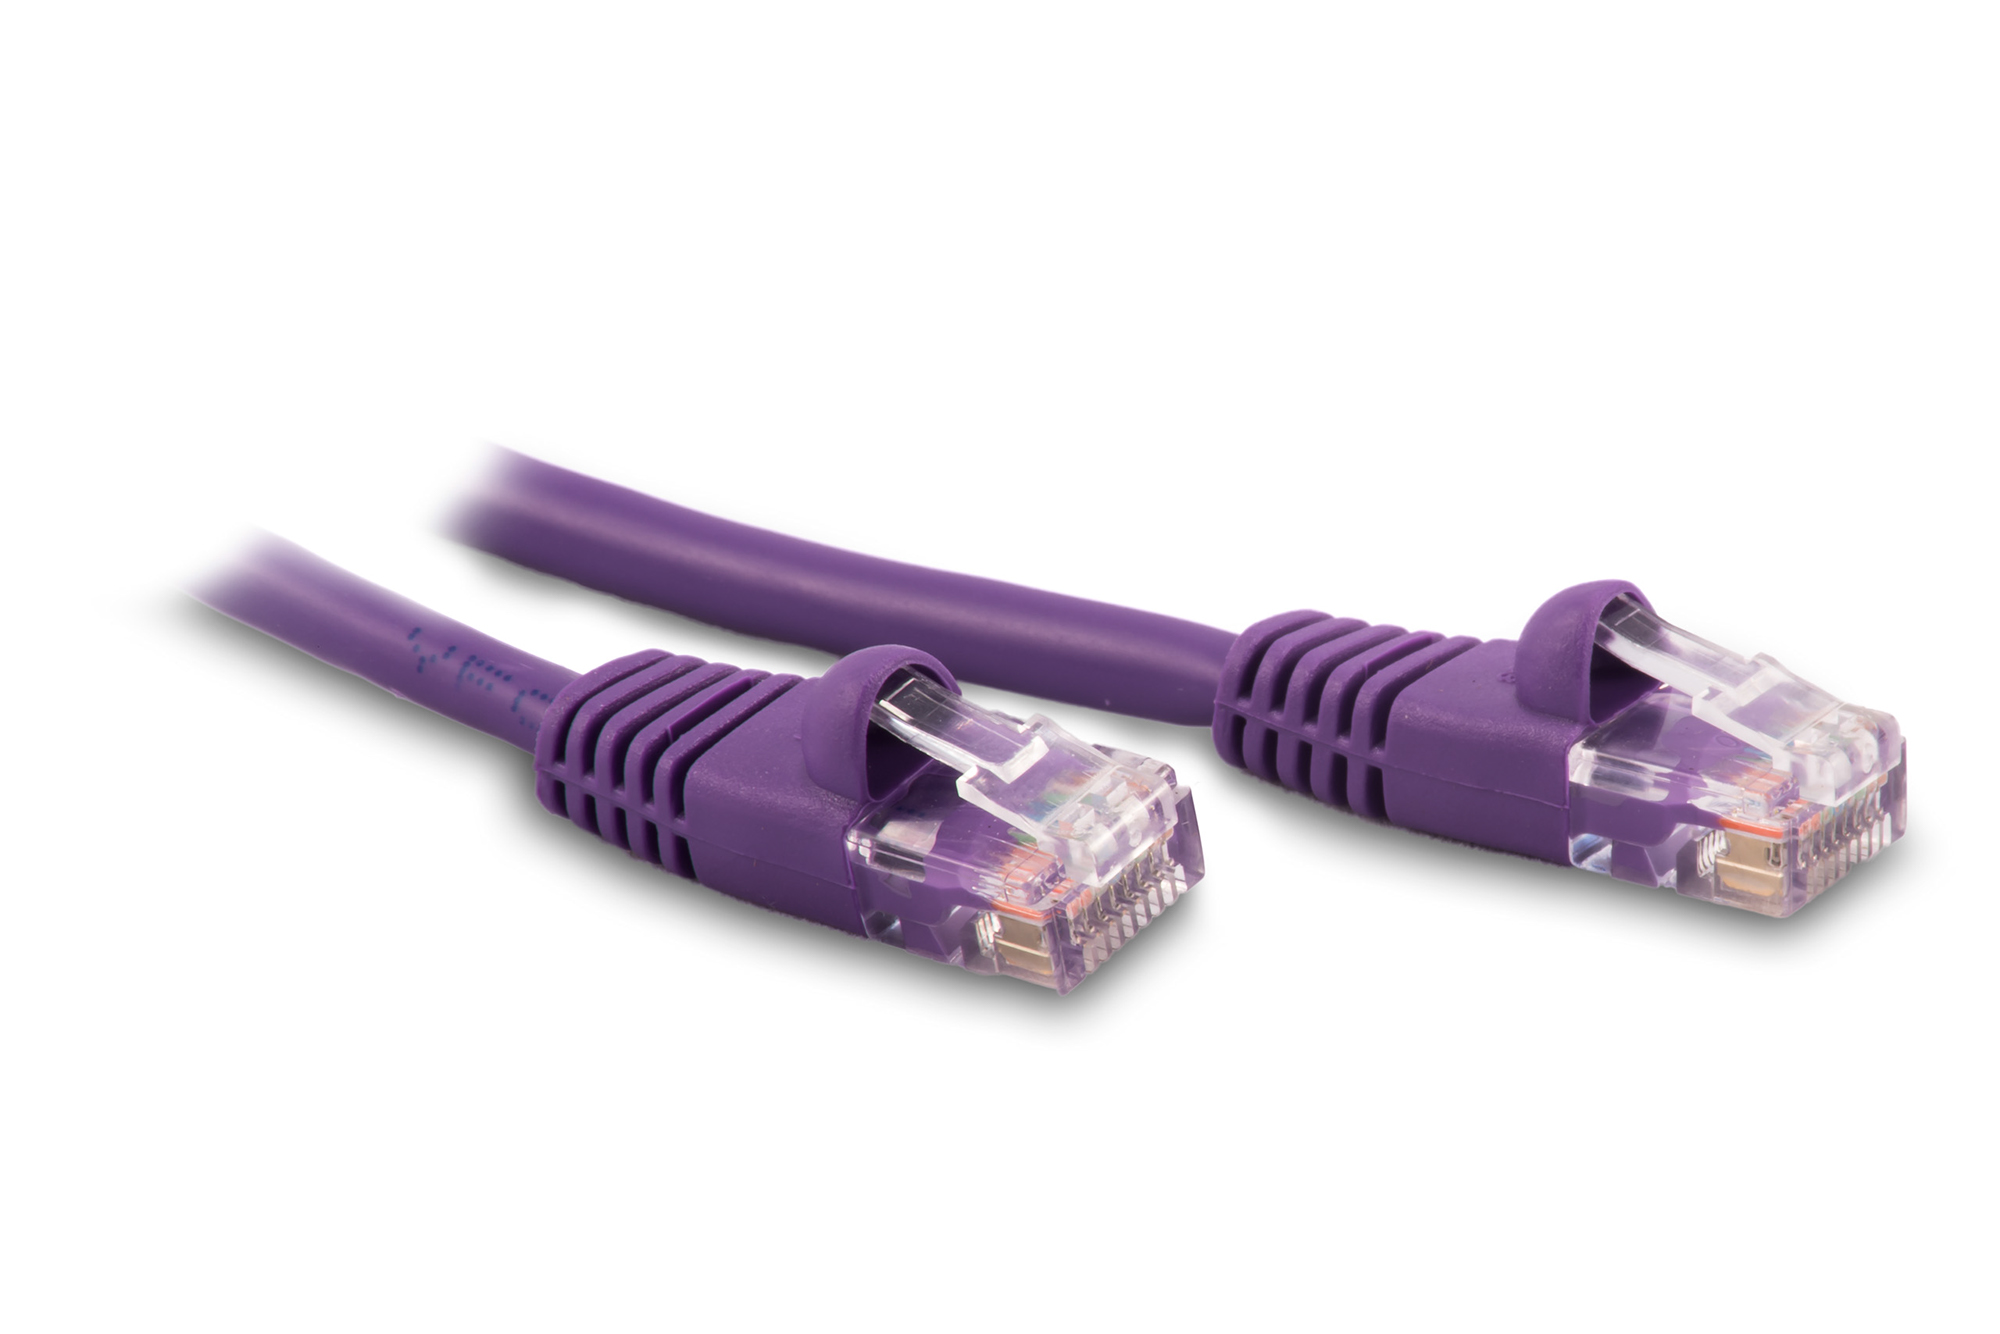 150ft Cat6 Ethernet Patch Cable - Violet Color - Snagless Boot